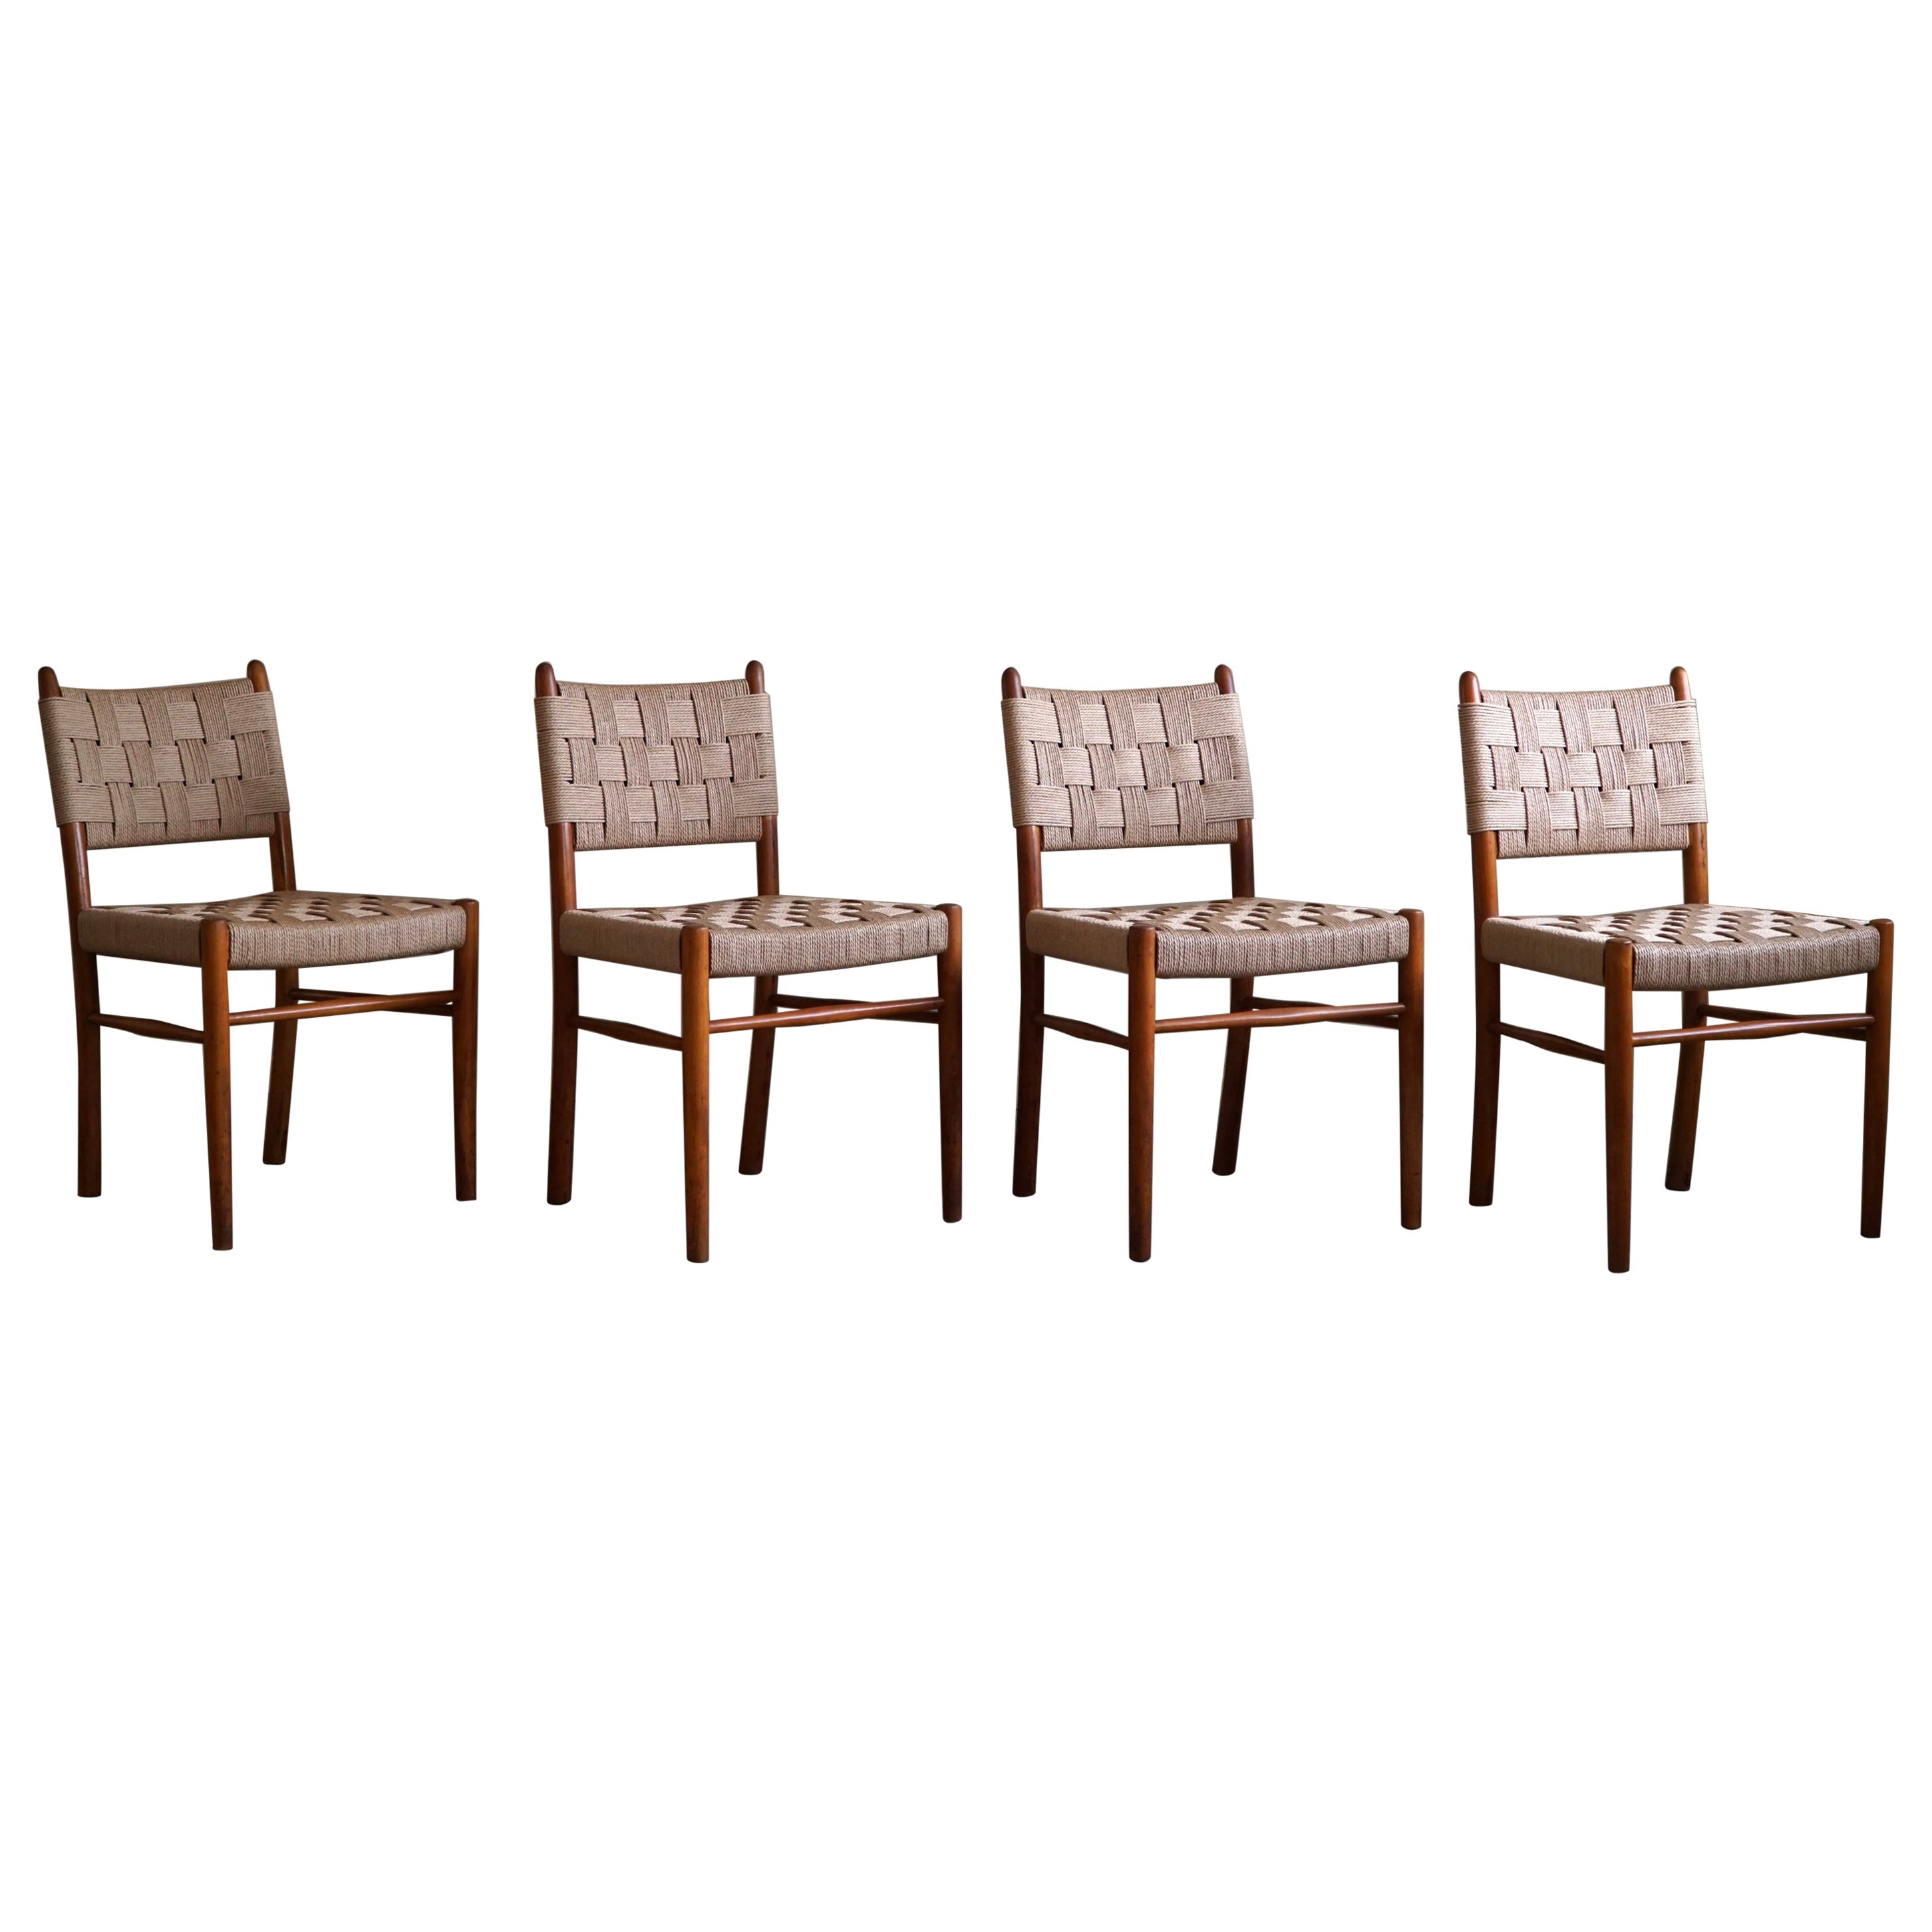 A Set of 4 Dining Chairs By Karl Schrøder for Fritz Hansen, "Model 1572", 1930s For Sale